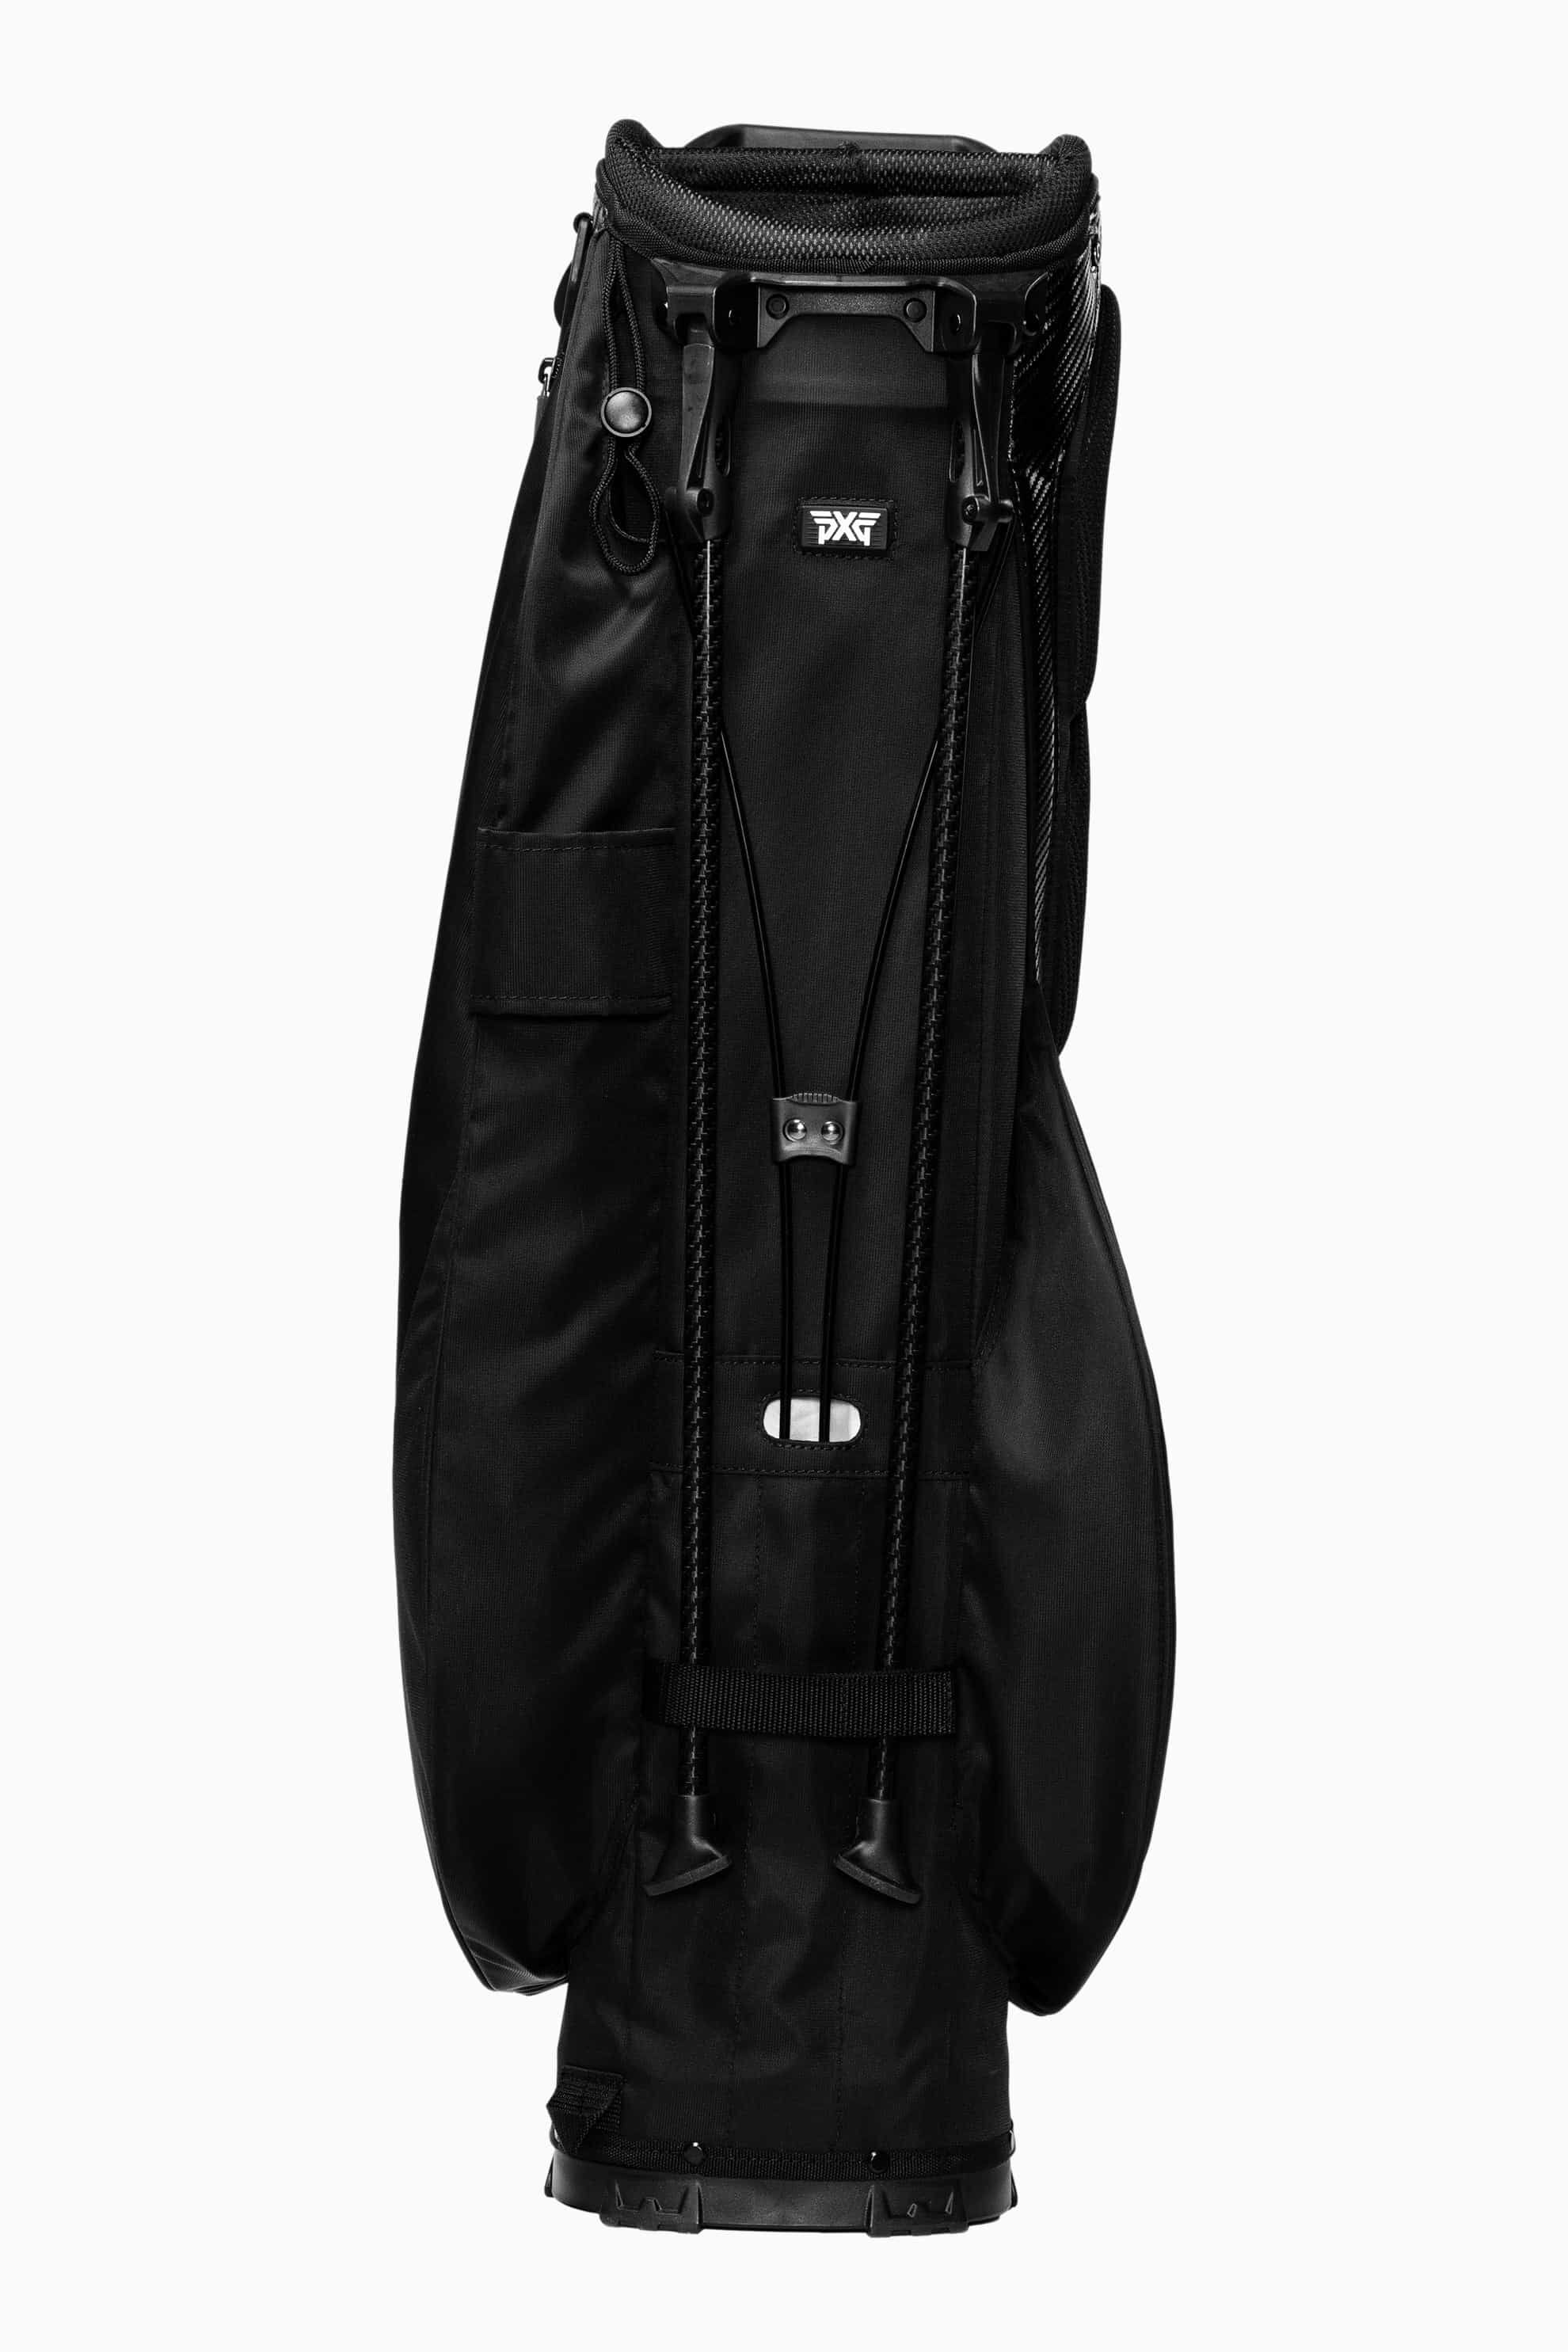 ZS☆PXG/LIGHT_WEIGHT_CARRY_STAND_BAG/ライトウェイトキャリー 